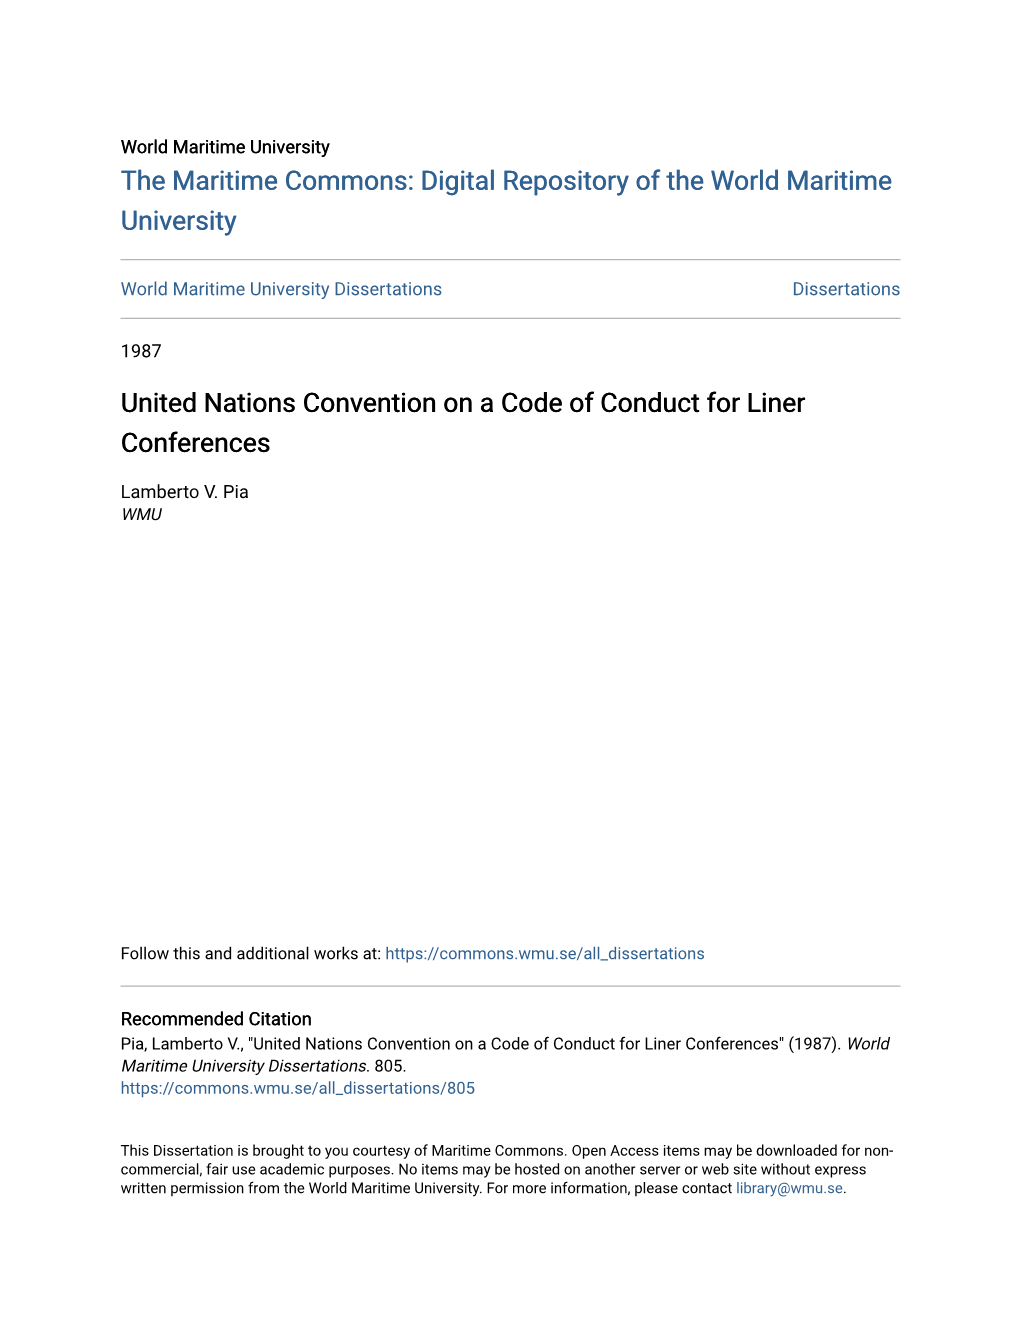 United Nations Convention on a Code of Conduct for Liner Conferences